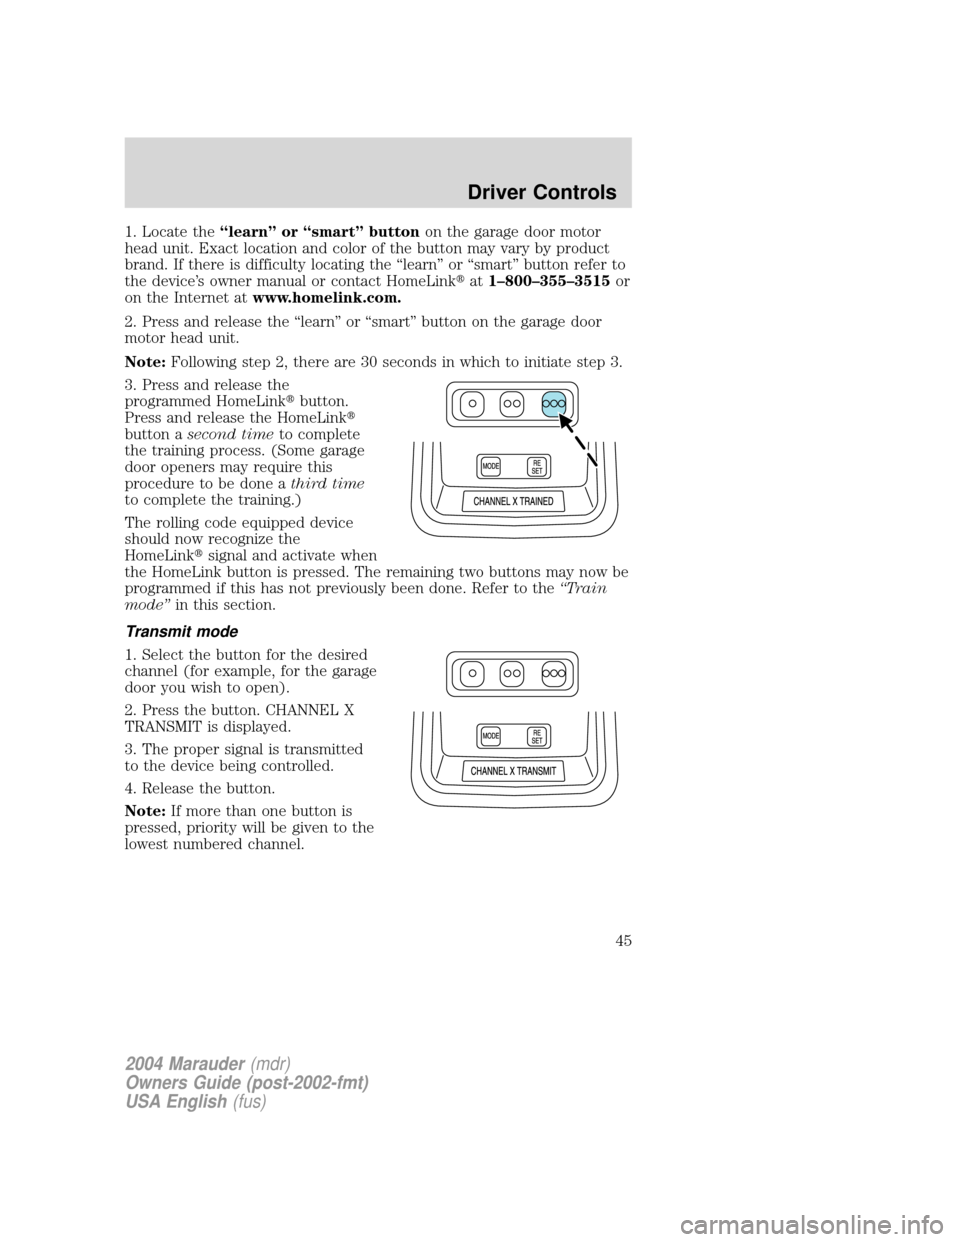 Mercury Marauder 2004  s Service Manual 1. Locate theªlearnº or ªsmartº buttonon the garage door motor
head unit. Exact location and color of the button may vary by product
brand. If there is difficulty locating the ªlearnº or ªsmart